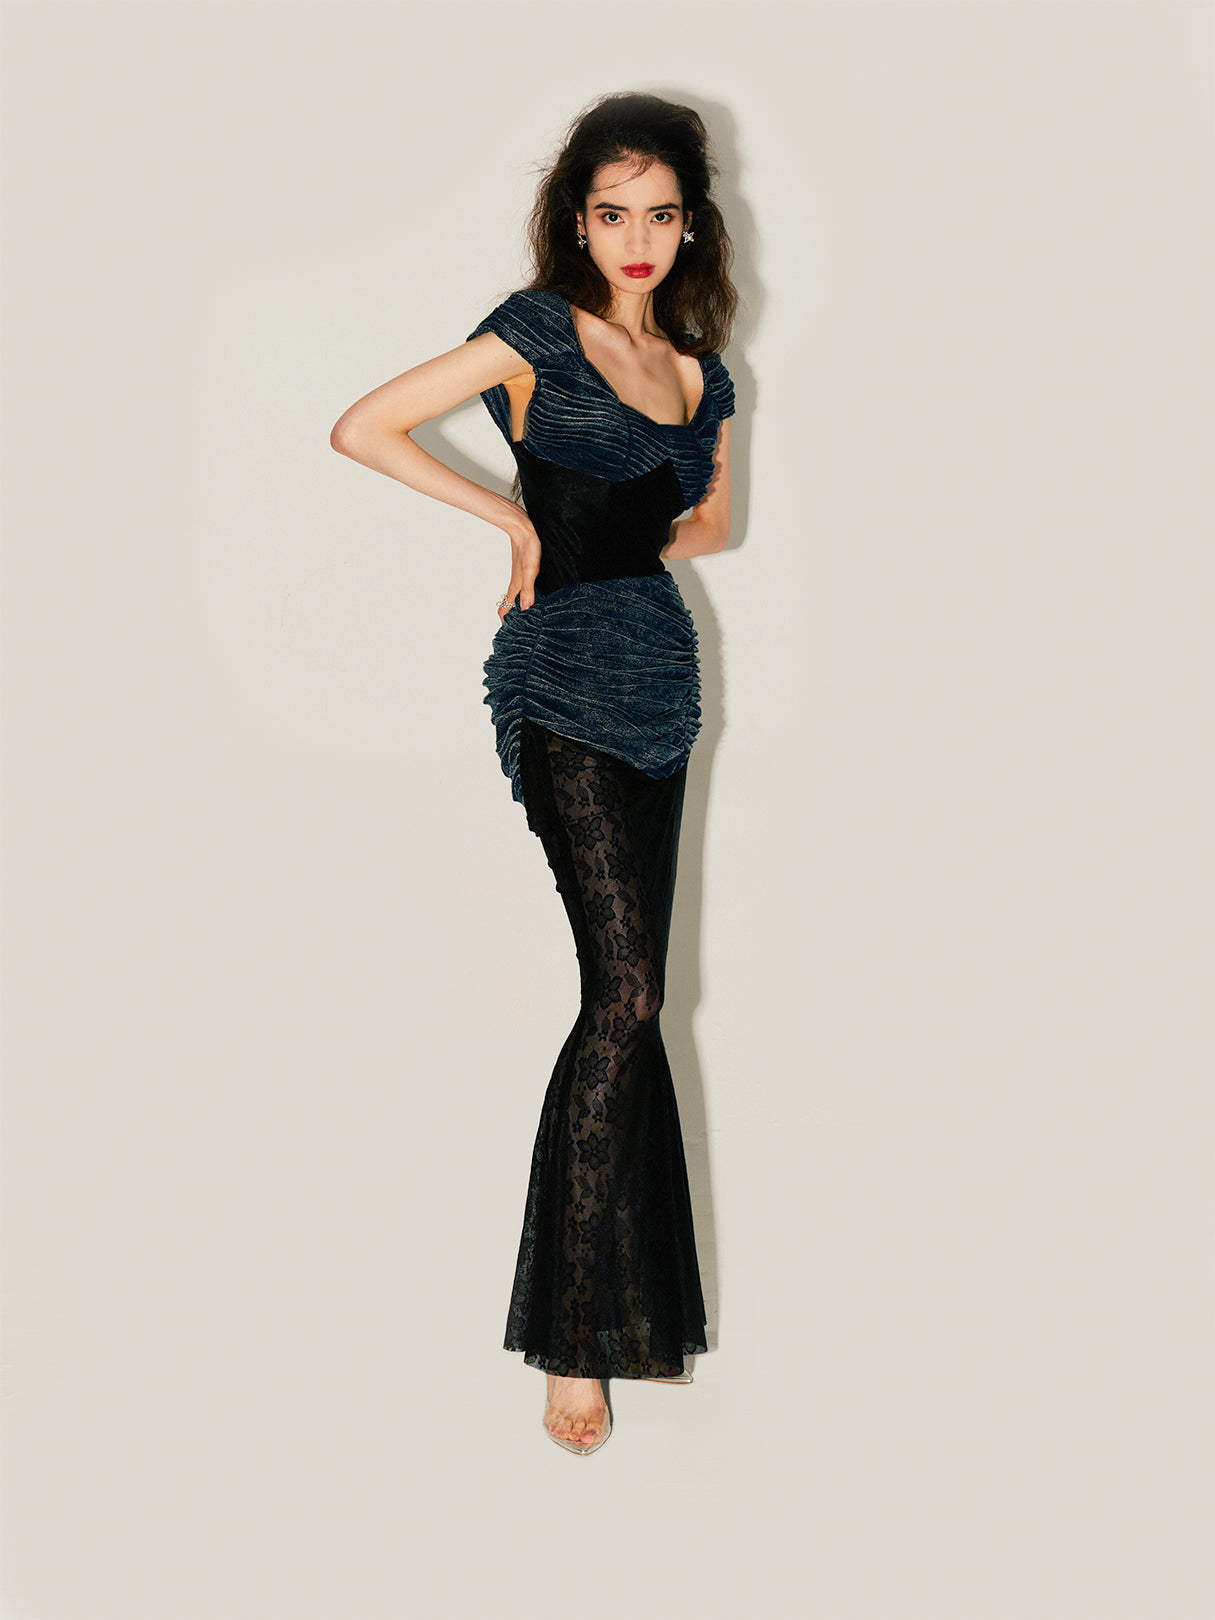 MIAOYAN24 Spring/Summer Knitted Denim Lace Patchwork Mermaid Skirt